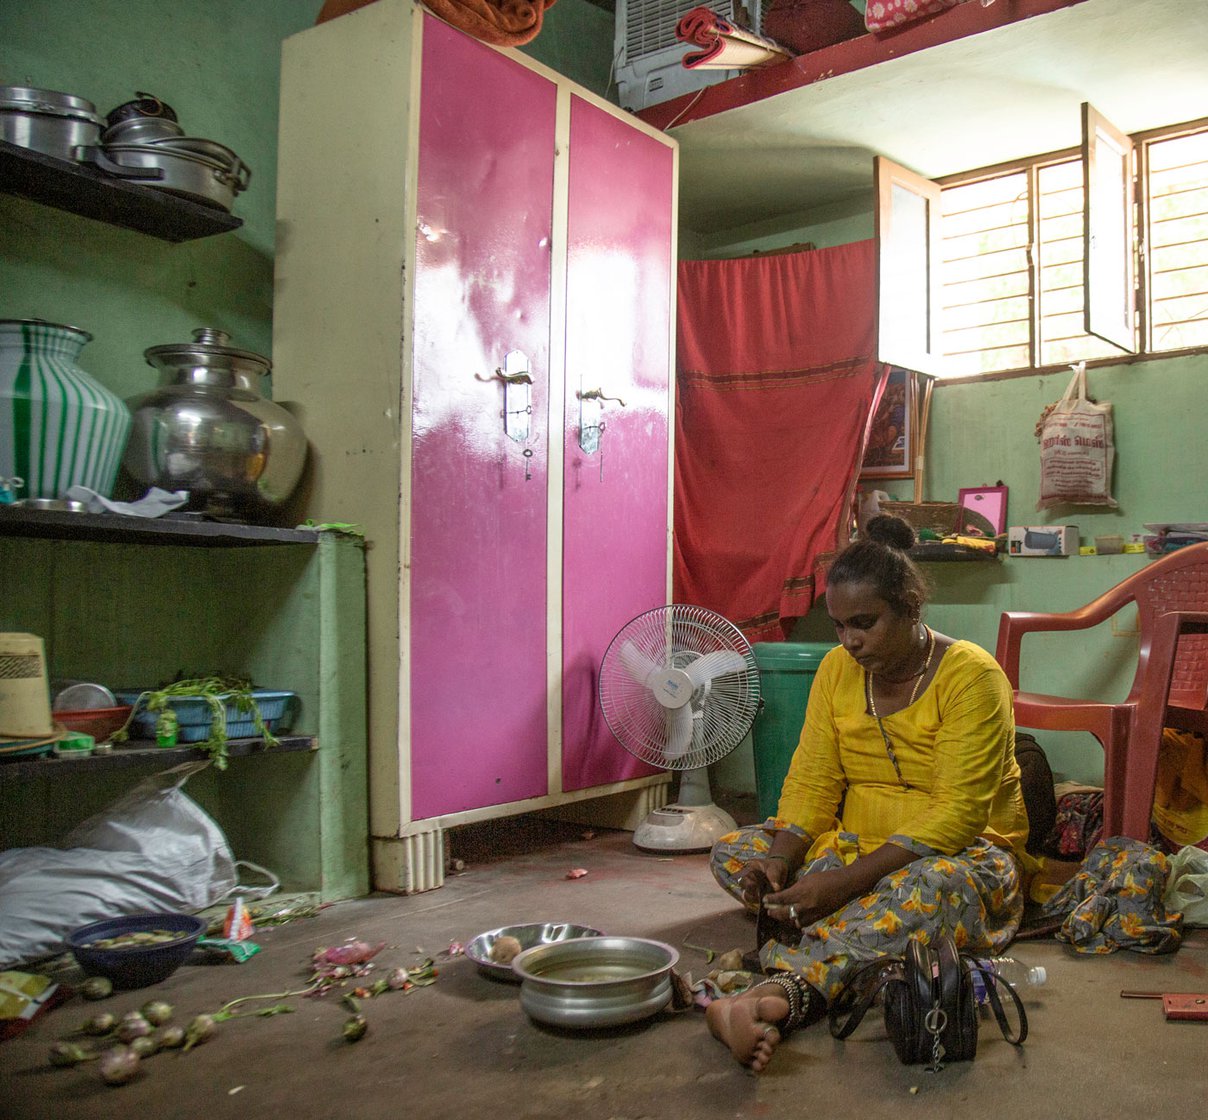 At Magie's room, V. Arasi helping cook a meal: 'I had to leave home since I was a trans woman' says Magie (right)